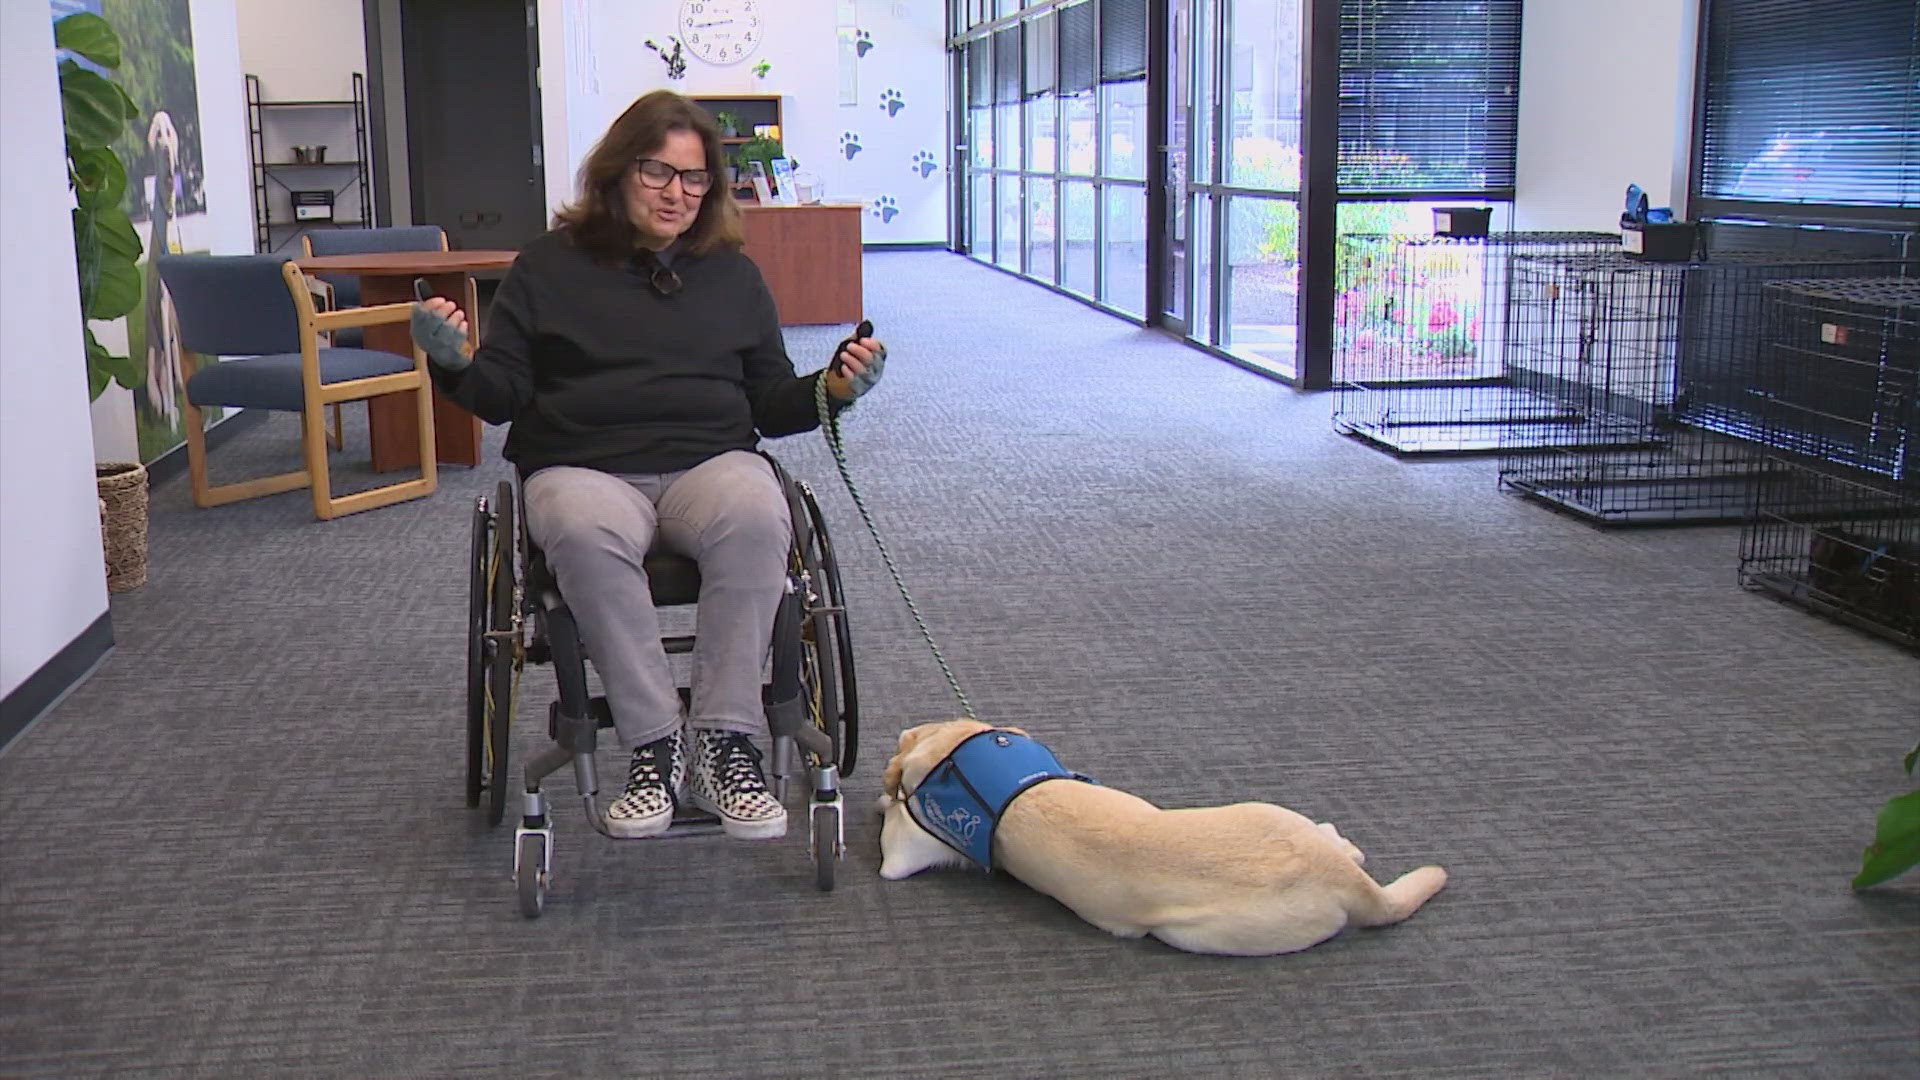 The non-profit service dog organization turns 49 years old on July 4. Several newly trained dogs have been matched with adults and kids in the Seattle area.